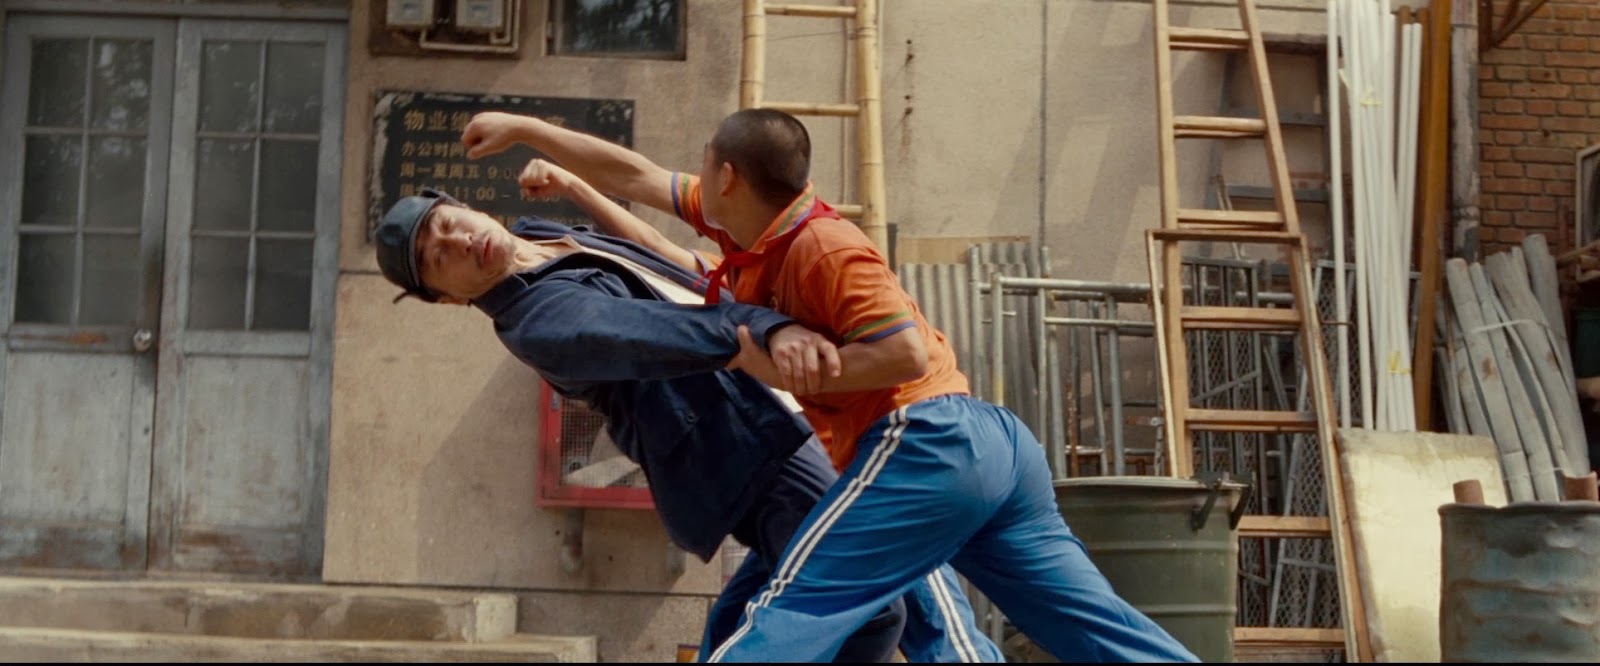 T.J. MOORE'S MOVIE MADNESS: THE KARATE KID (2010)